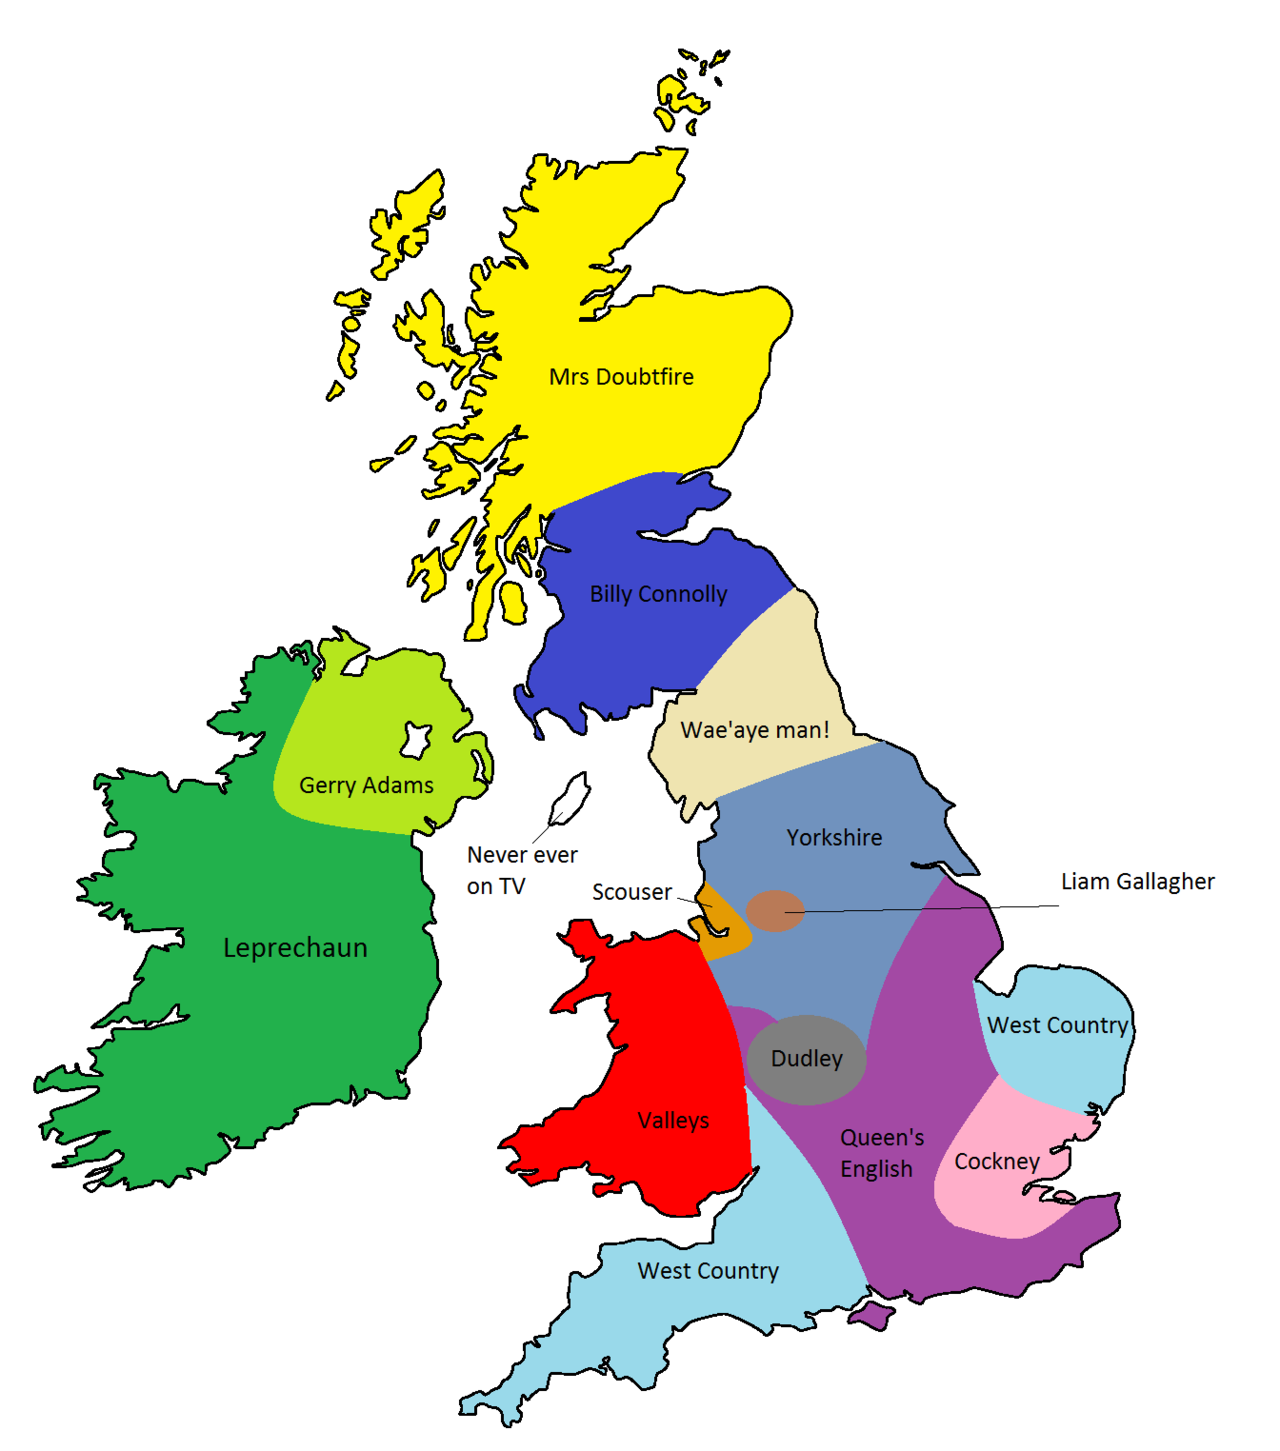 clipart map of uk and ireland - photo #49